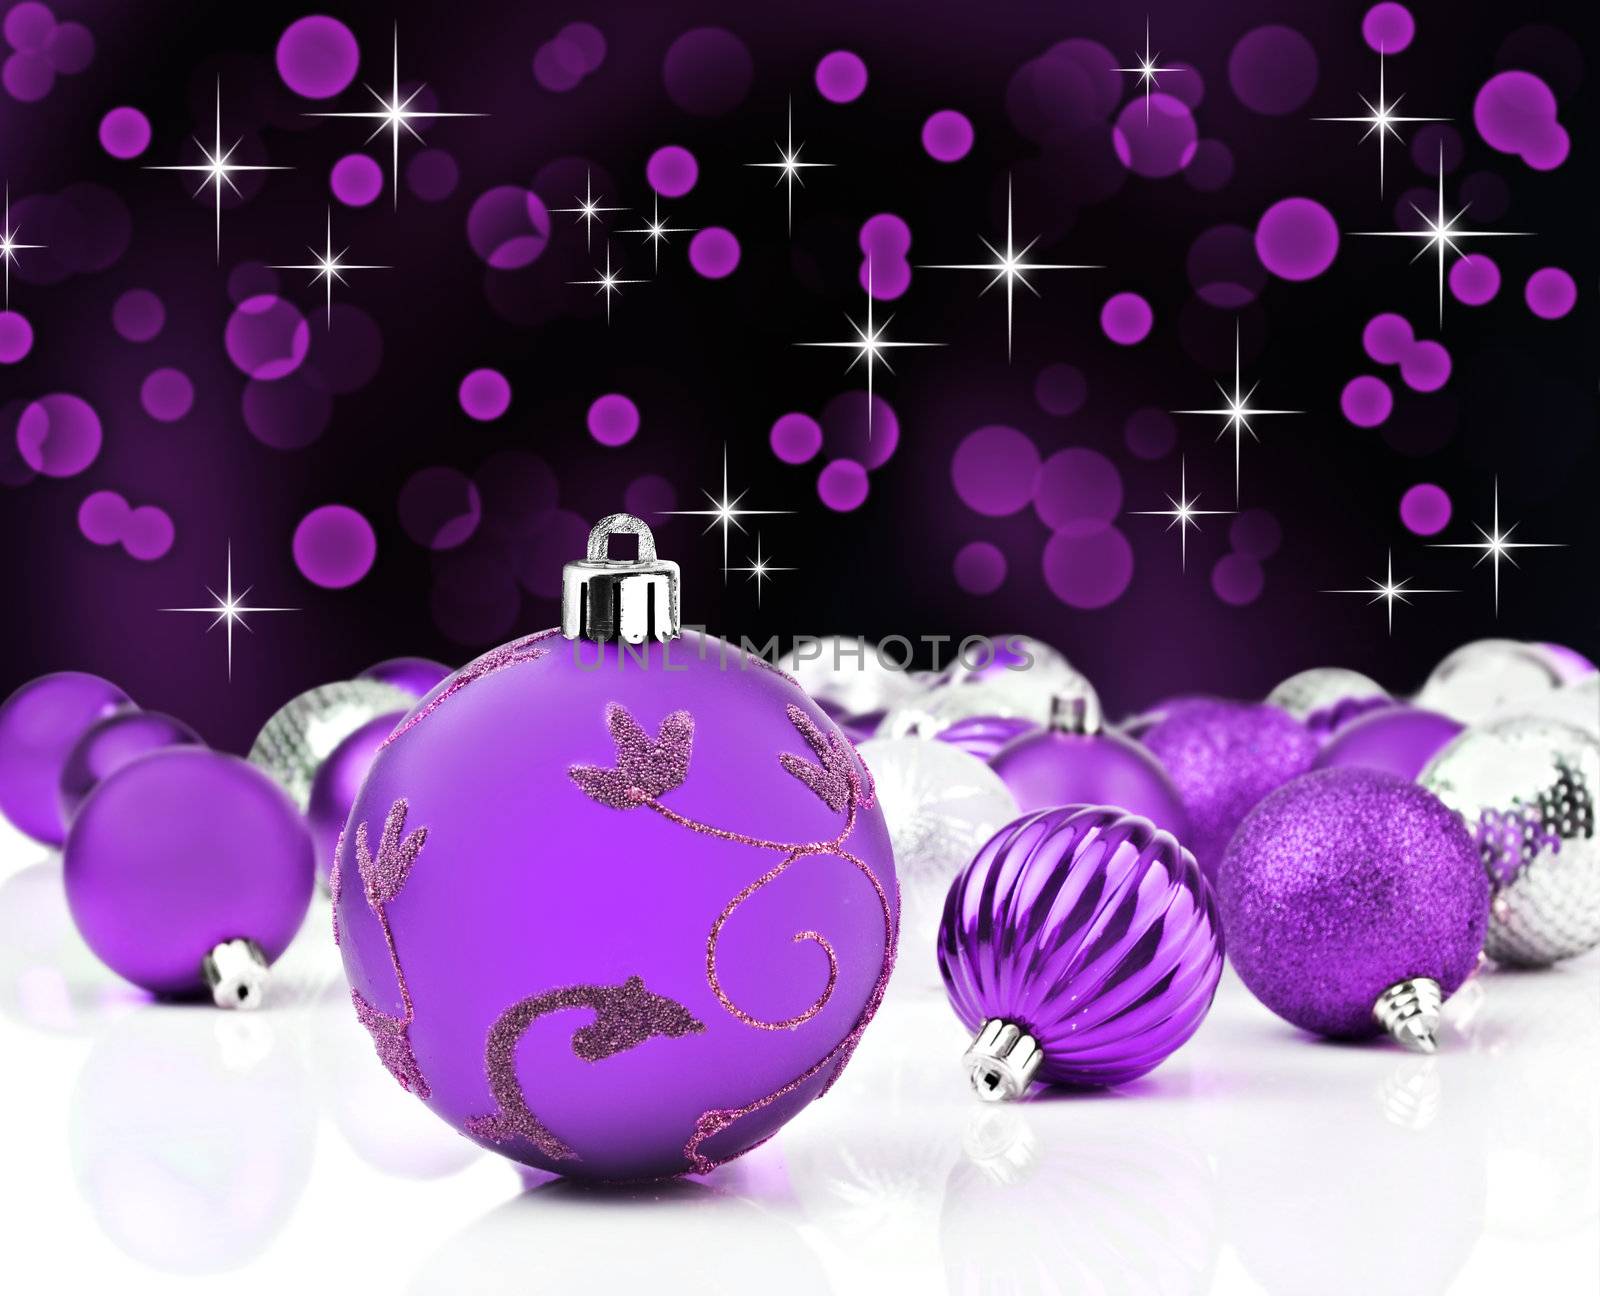 Purple decorative christmas ornaments with star background by tish1